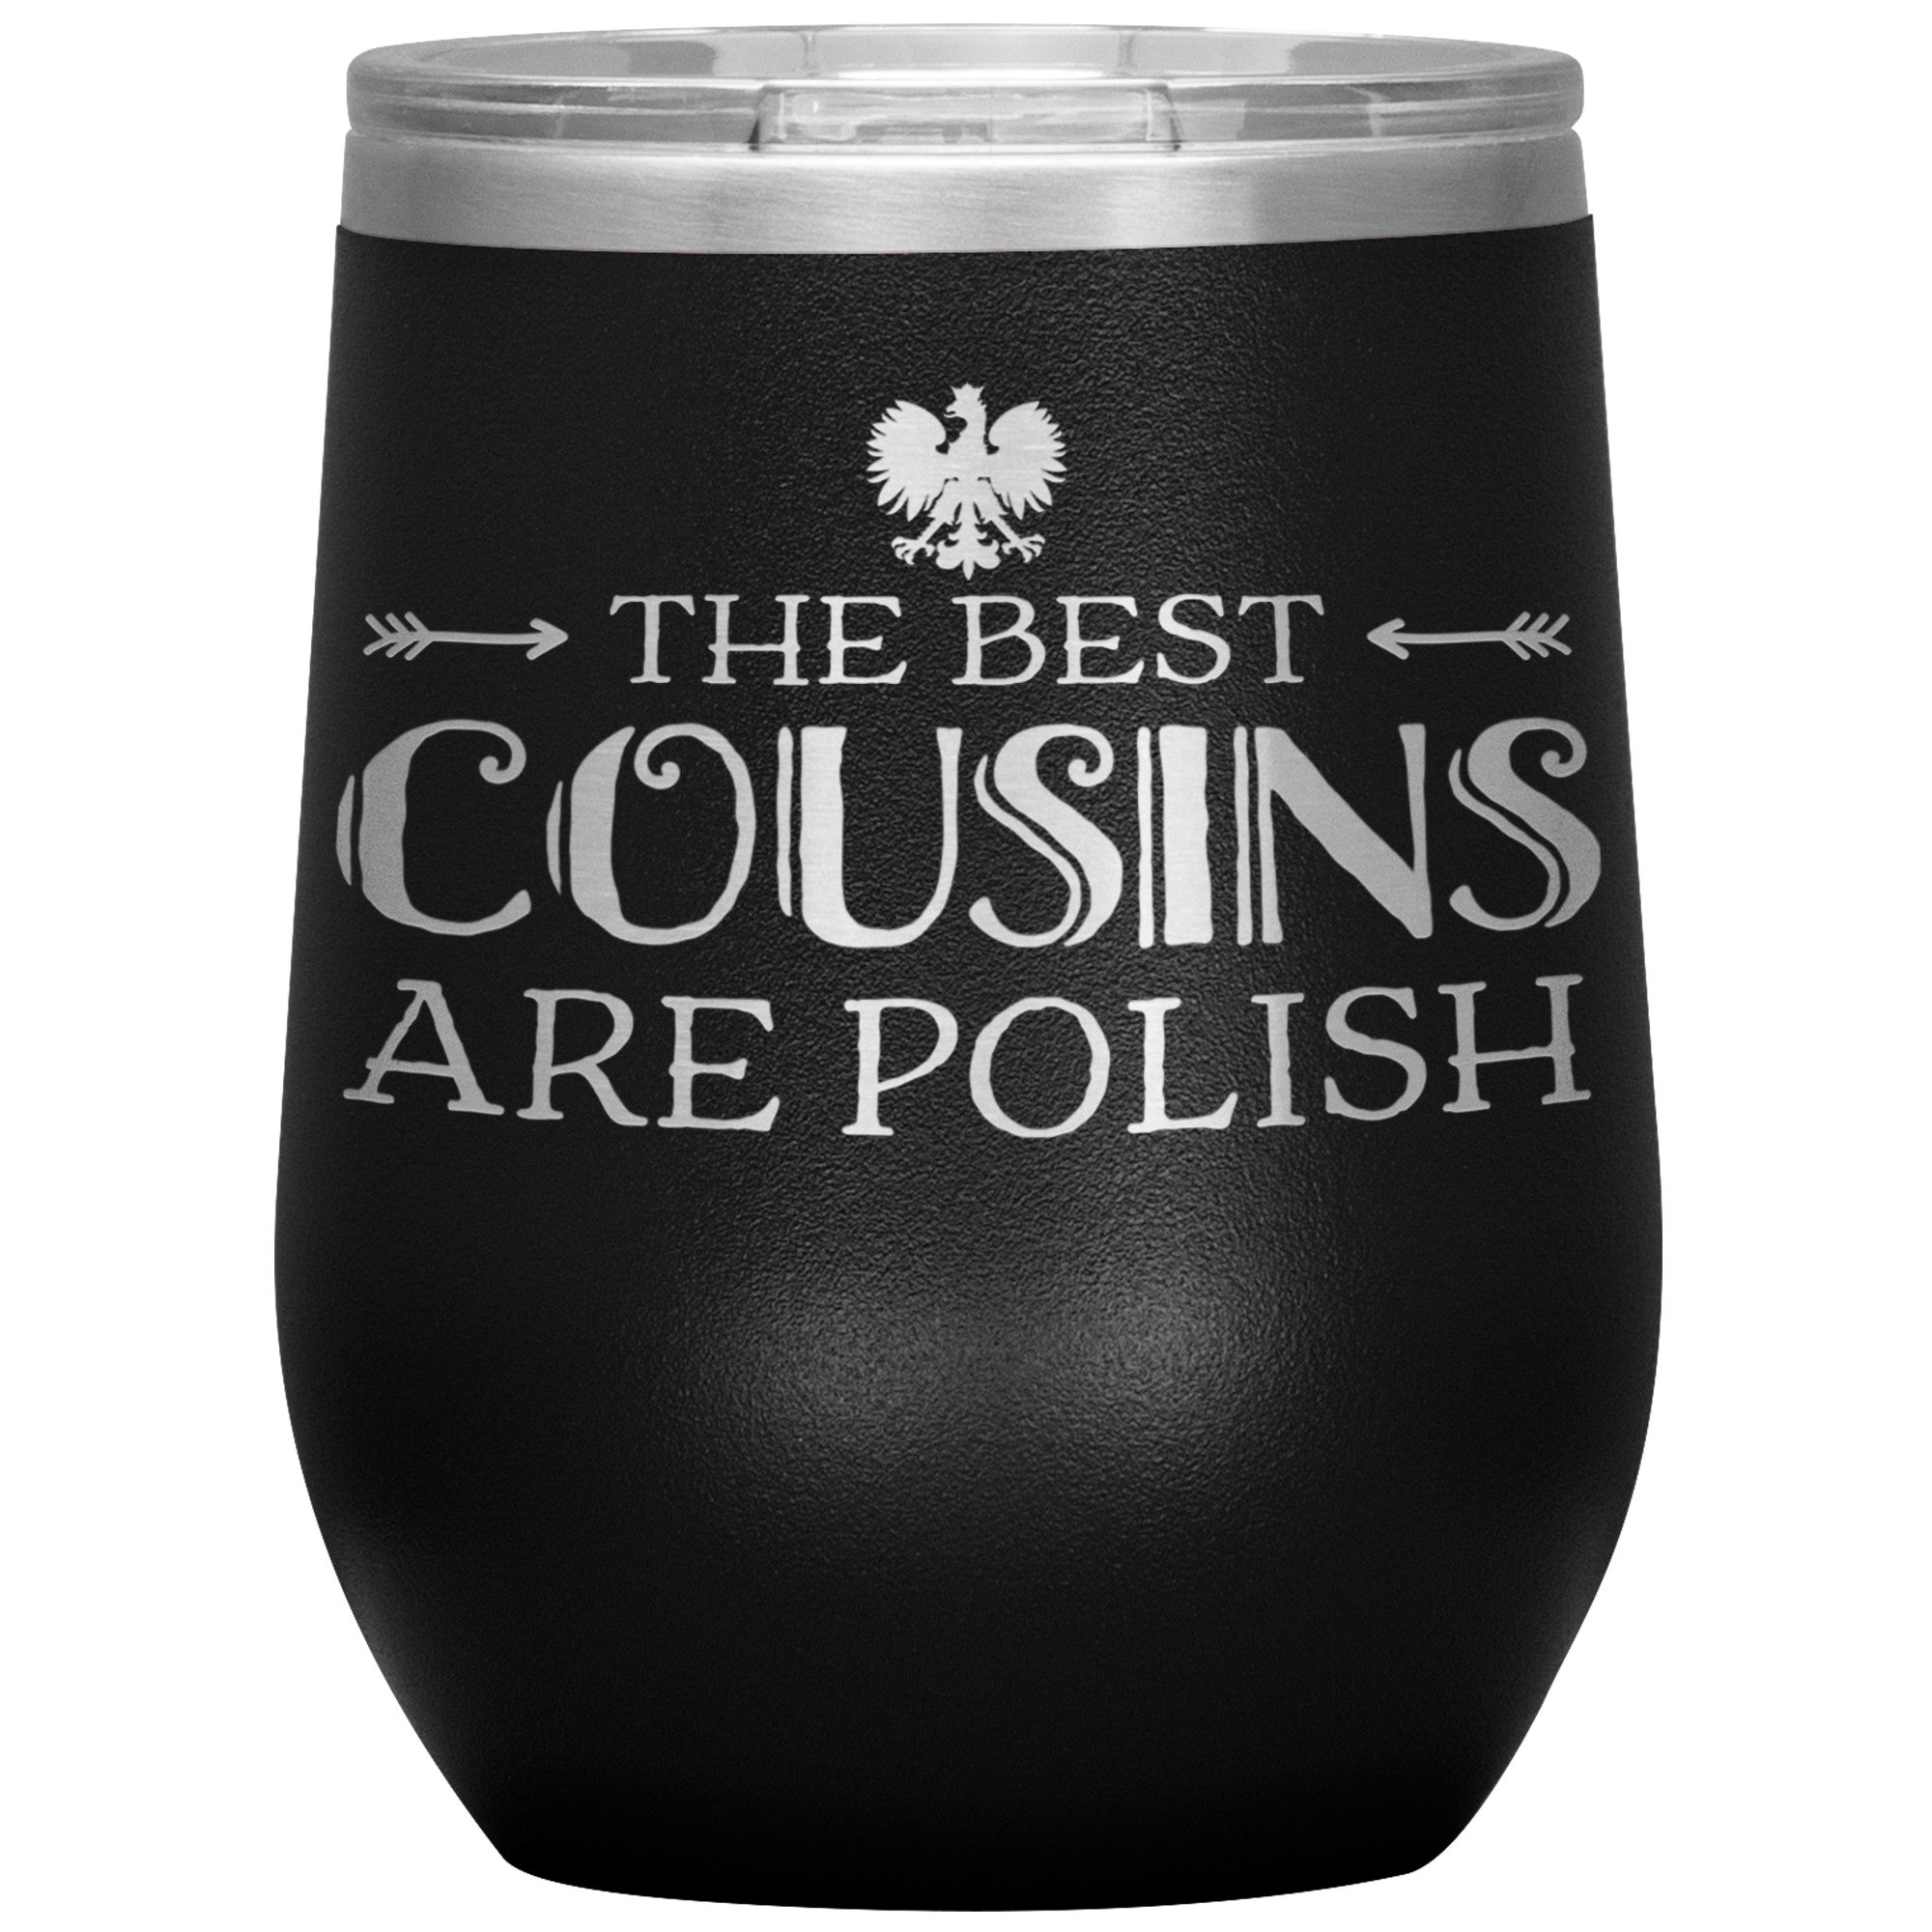 The Best Cousins Are Polish Insulated Wine Tumbler Tumblers teelaunch Black  